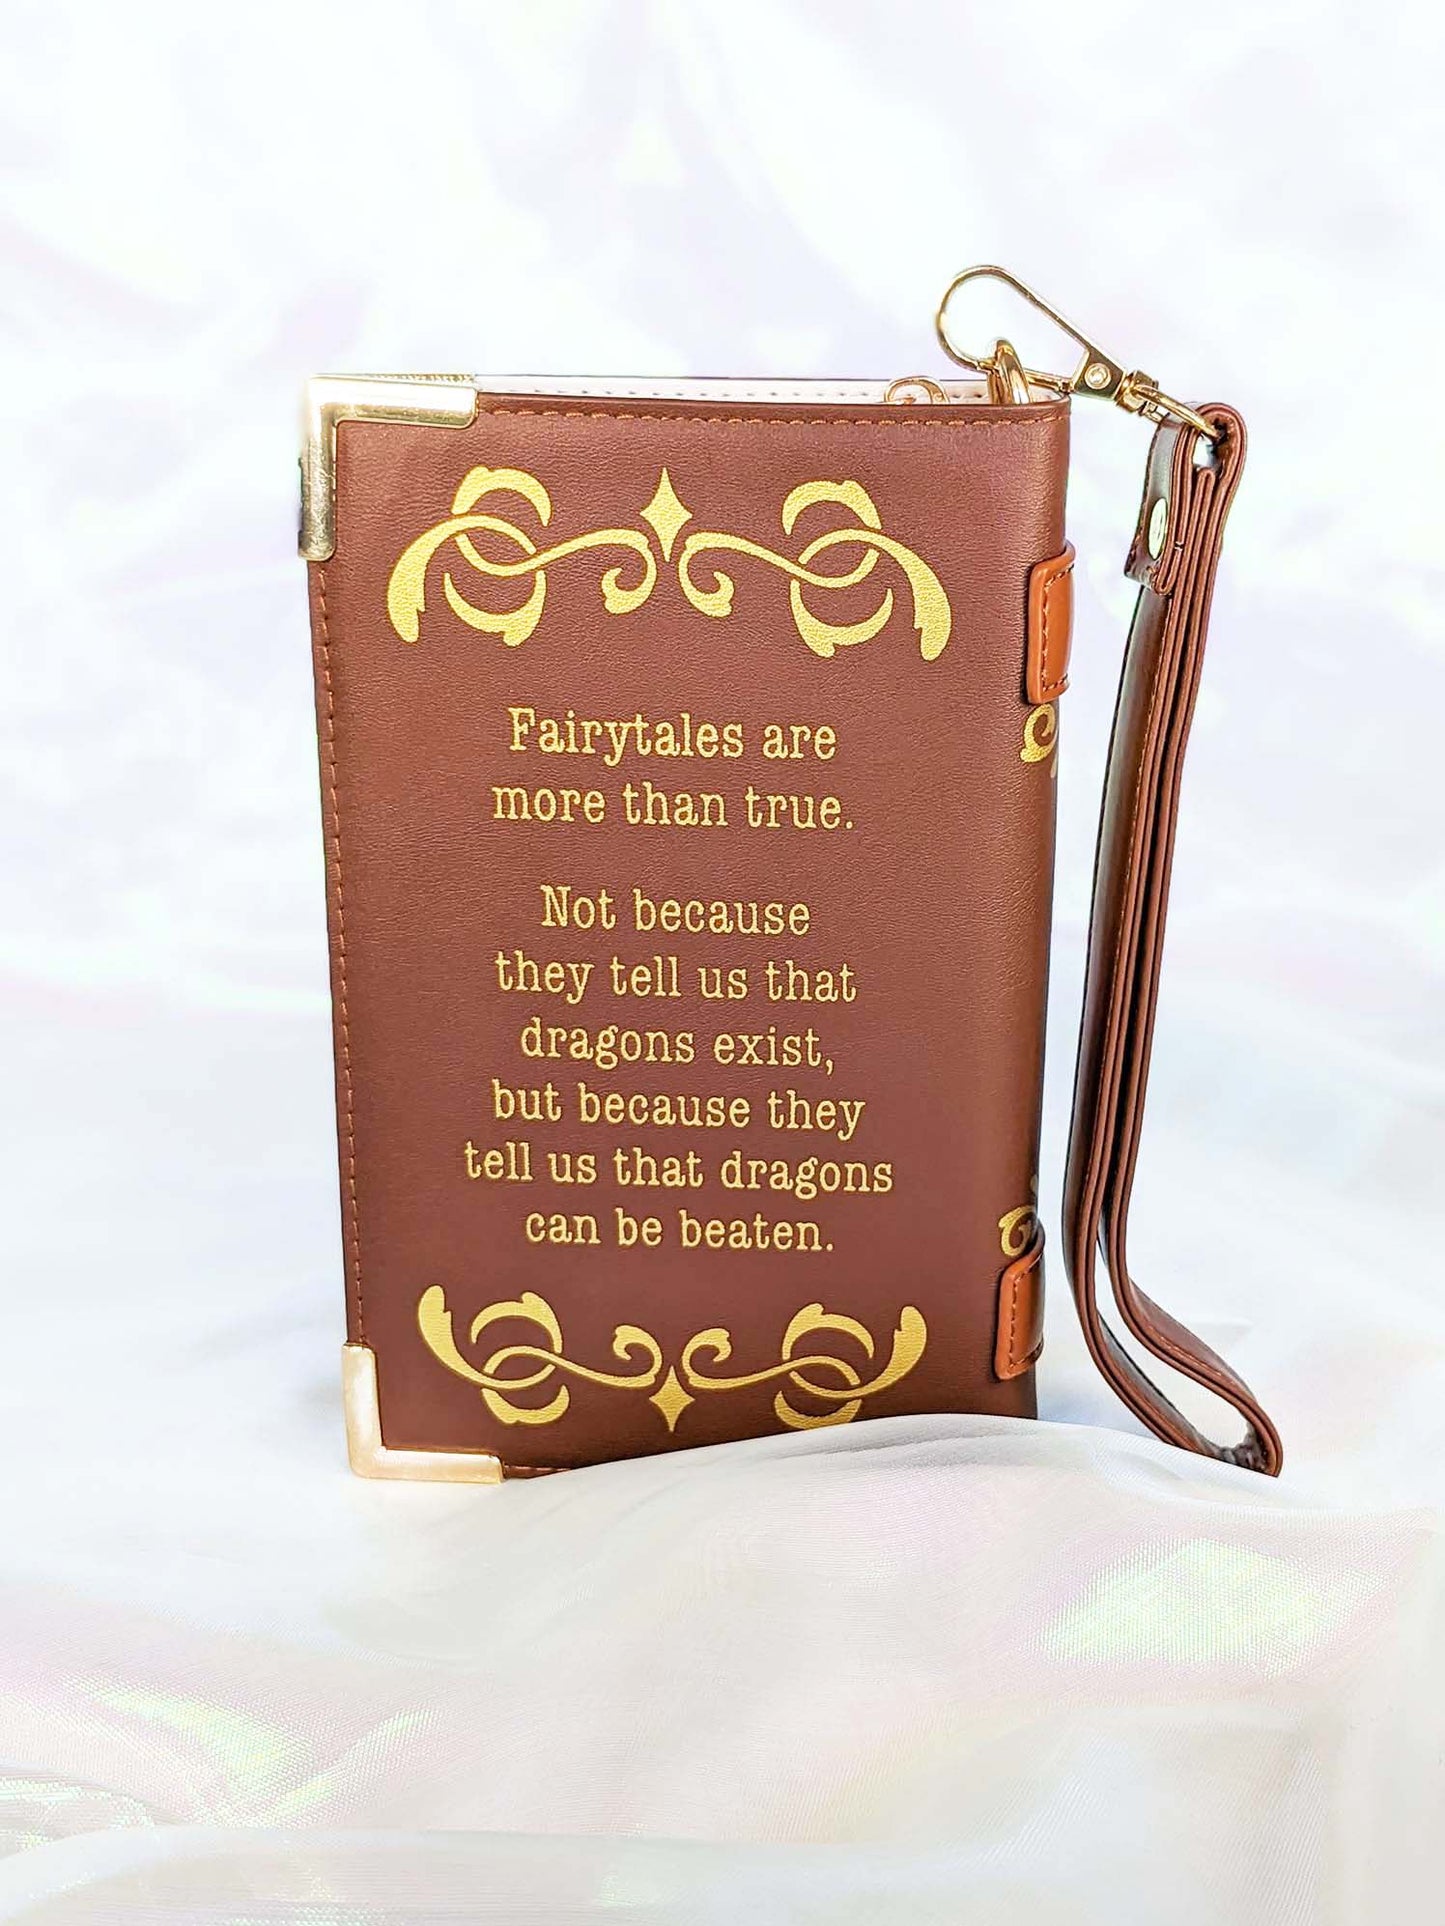 Once Upon A Time Fairytale Ita Purse Academia Brown